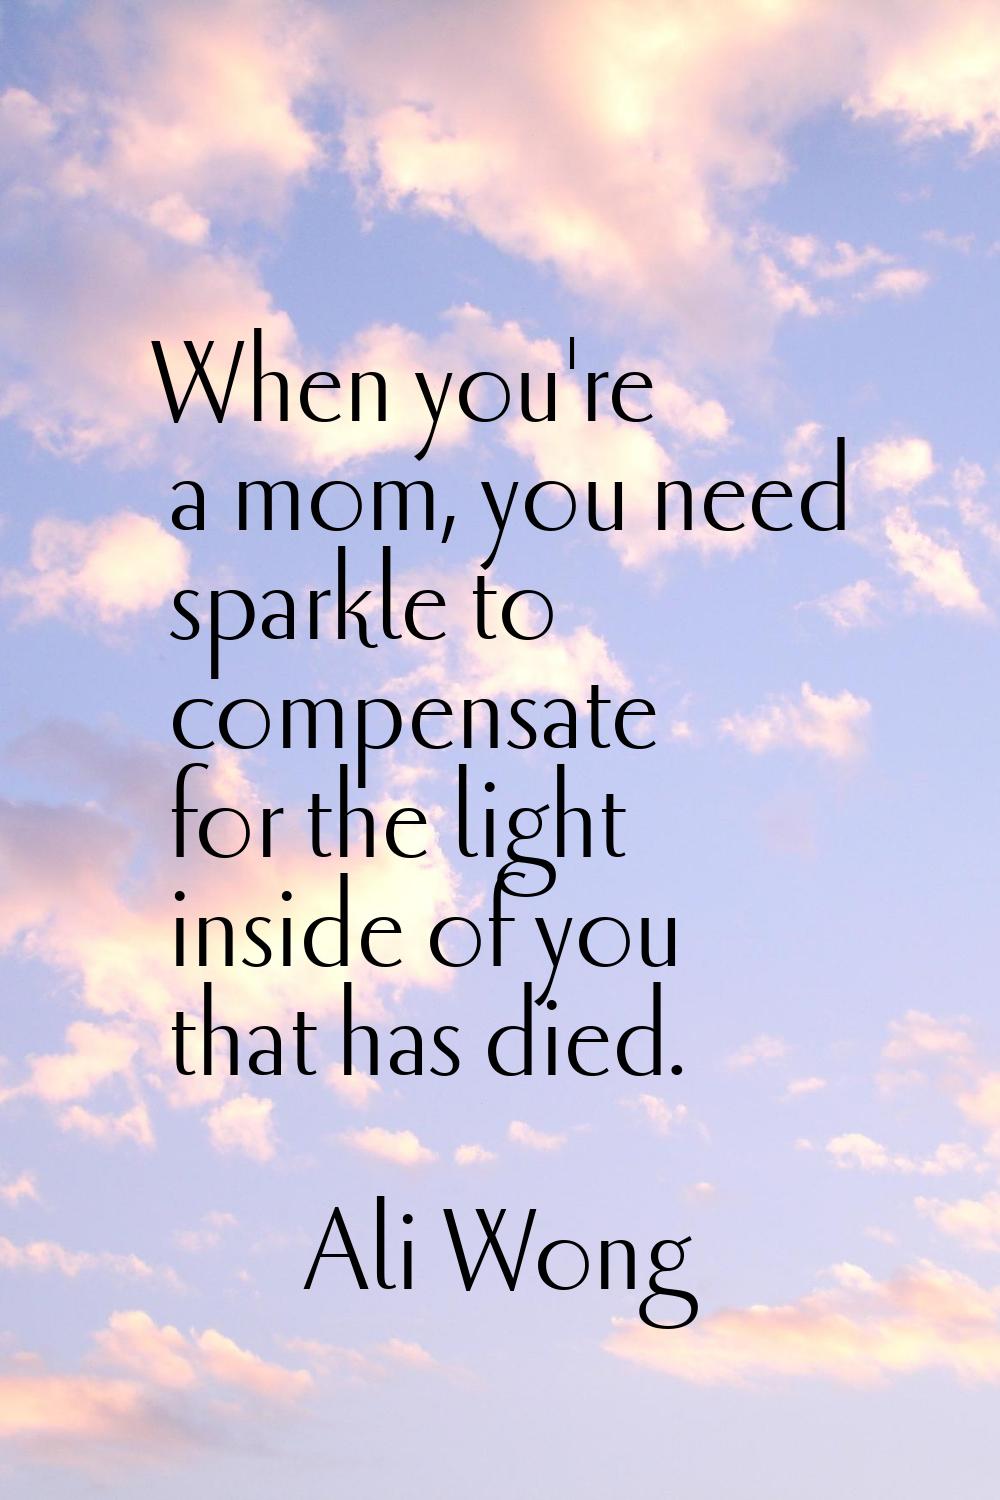 When you're a mom, you need sparkle to compensate for the light inside of you that has died.